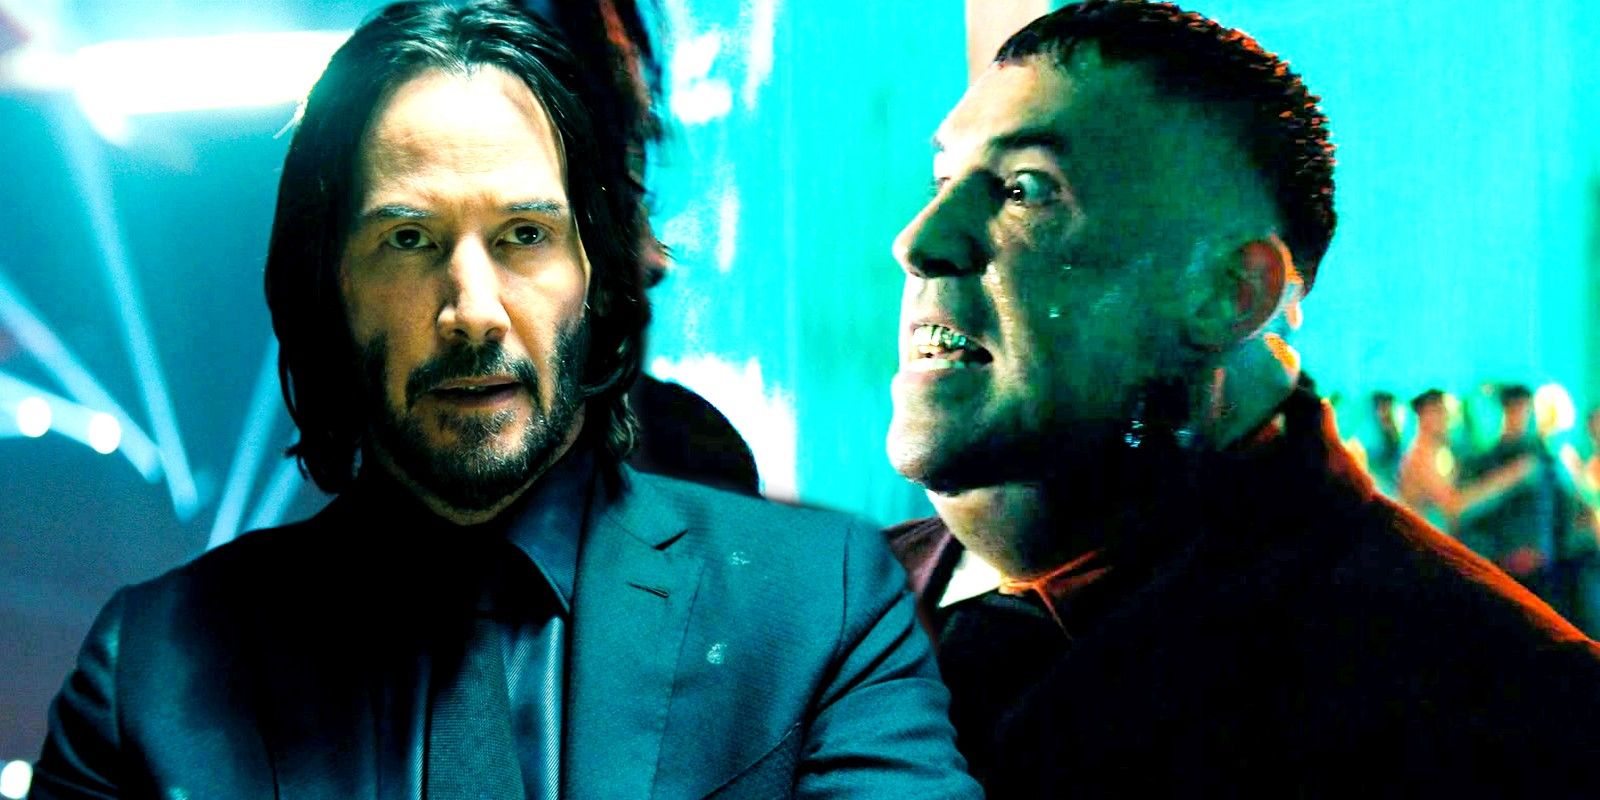 Blended image of John Wick at the poker table and Killa holding John in a fight in John Wick 4